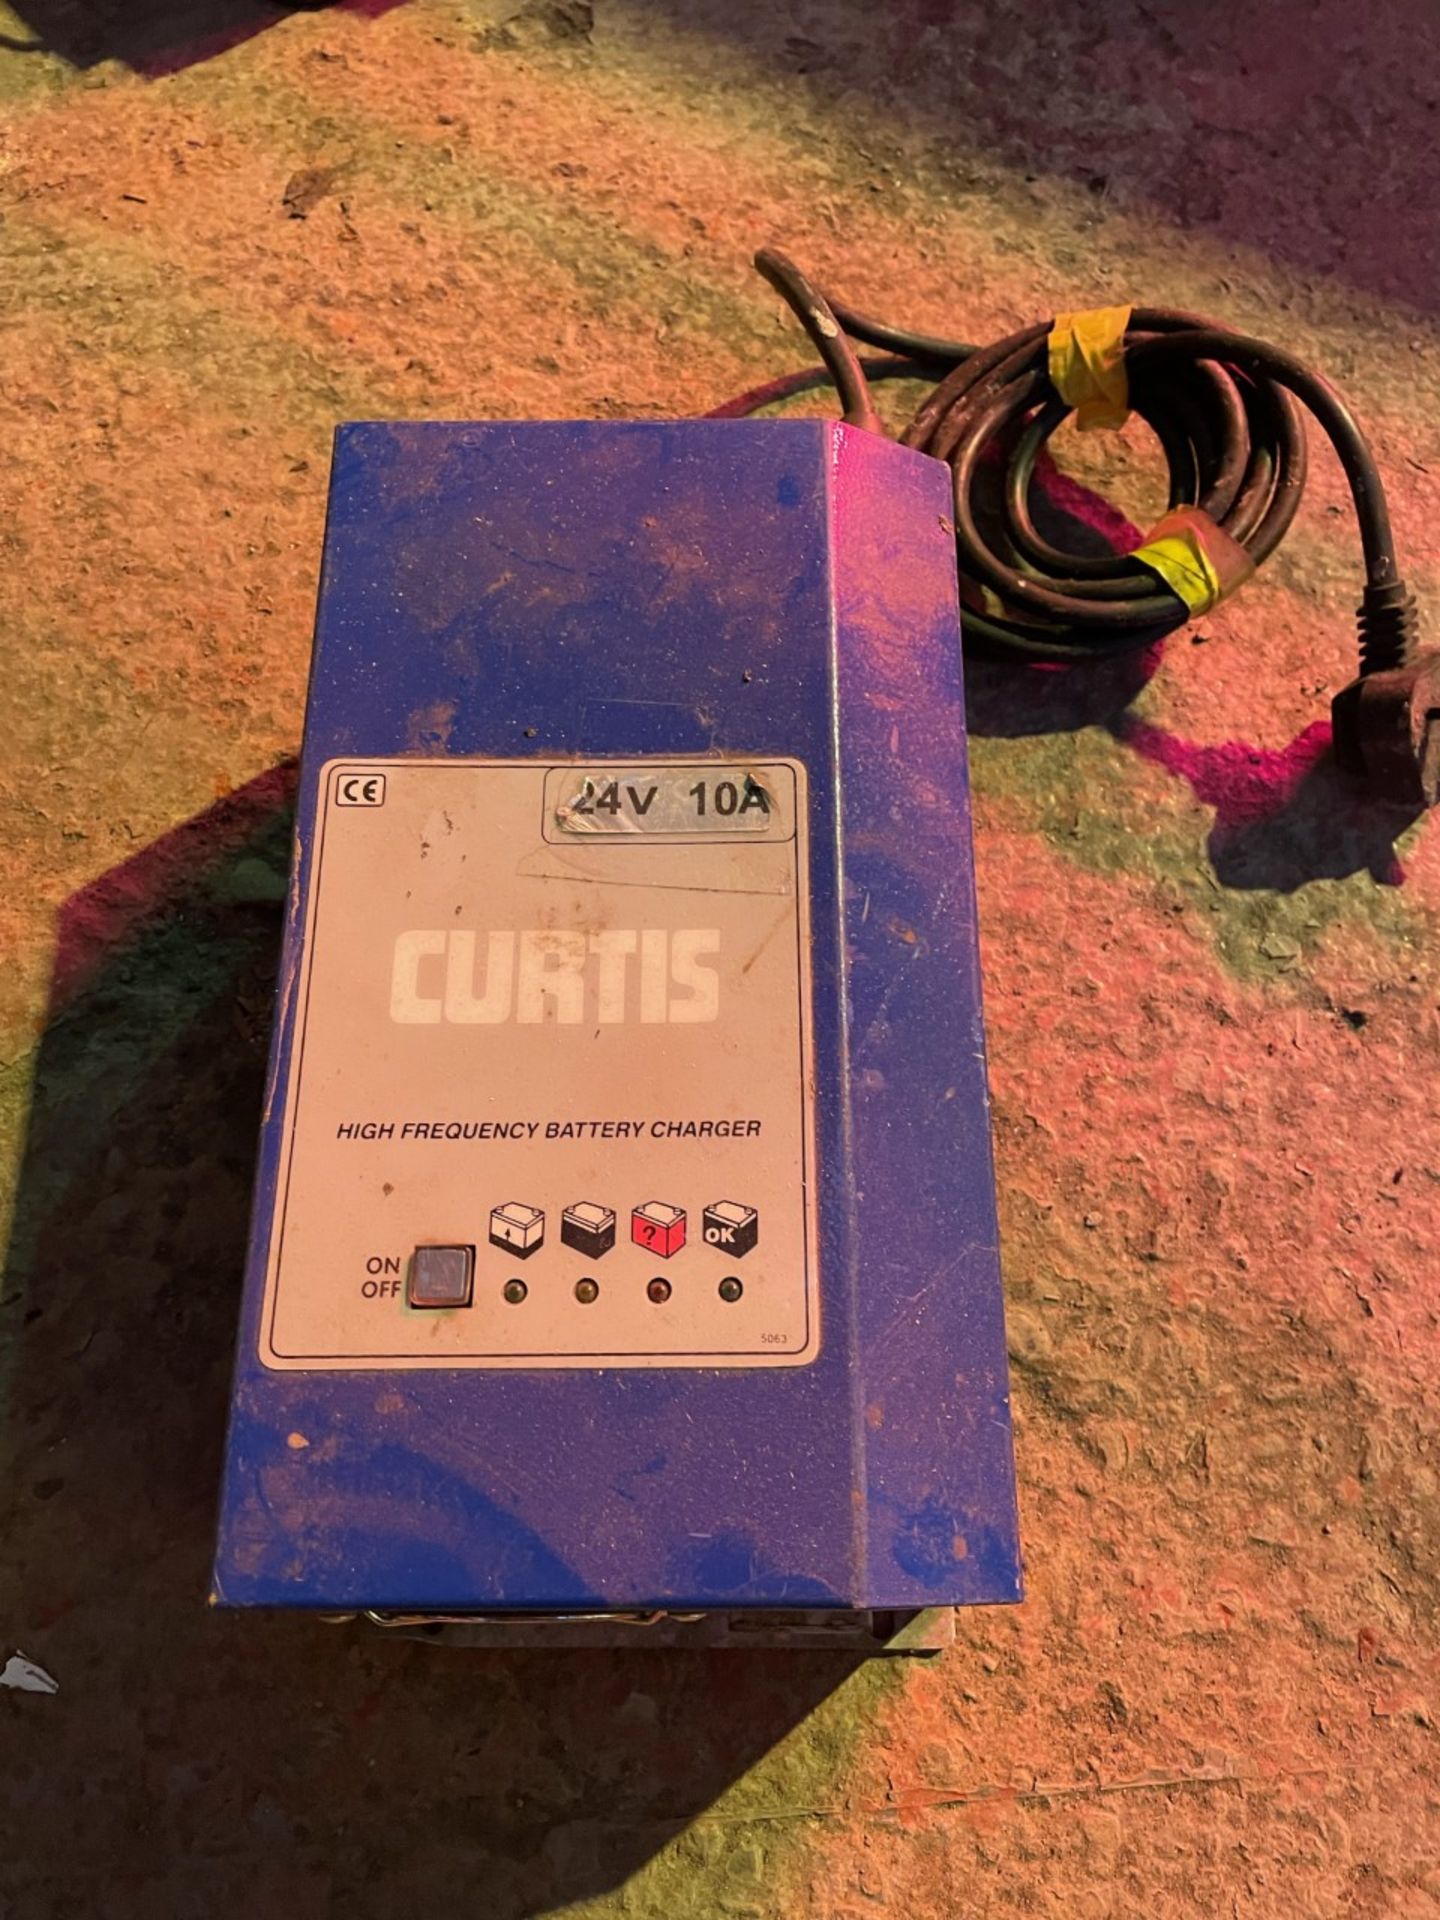 Curtis high frequency battery charger